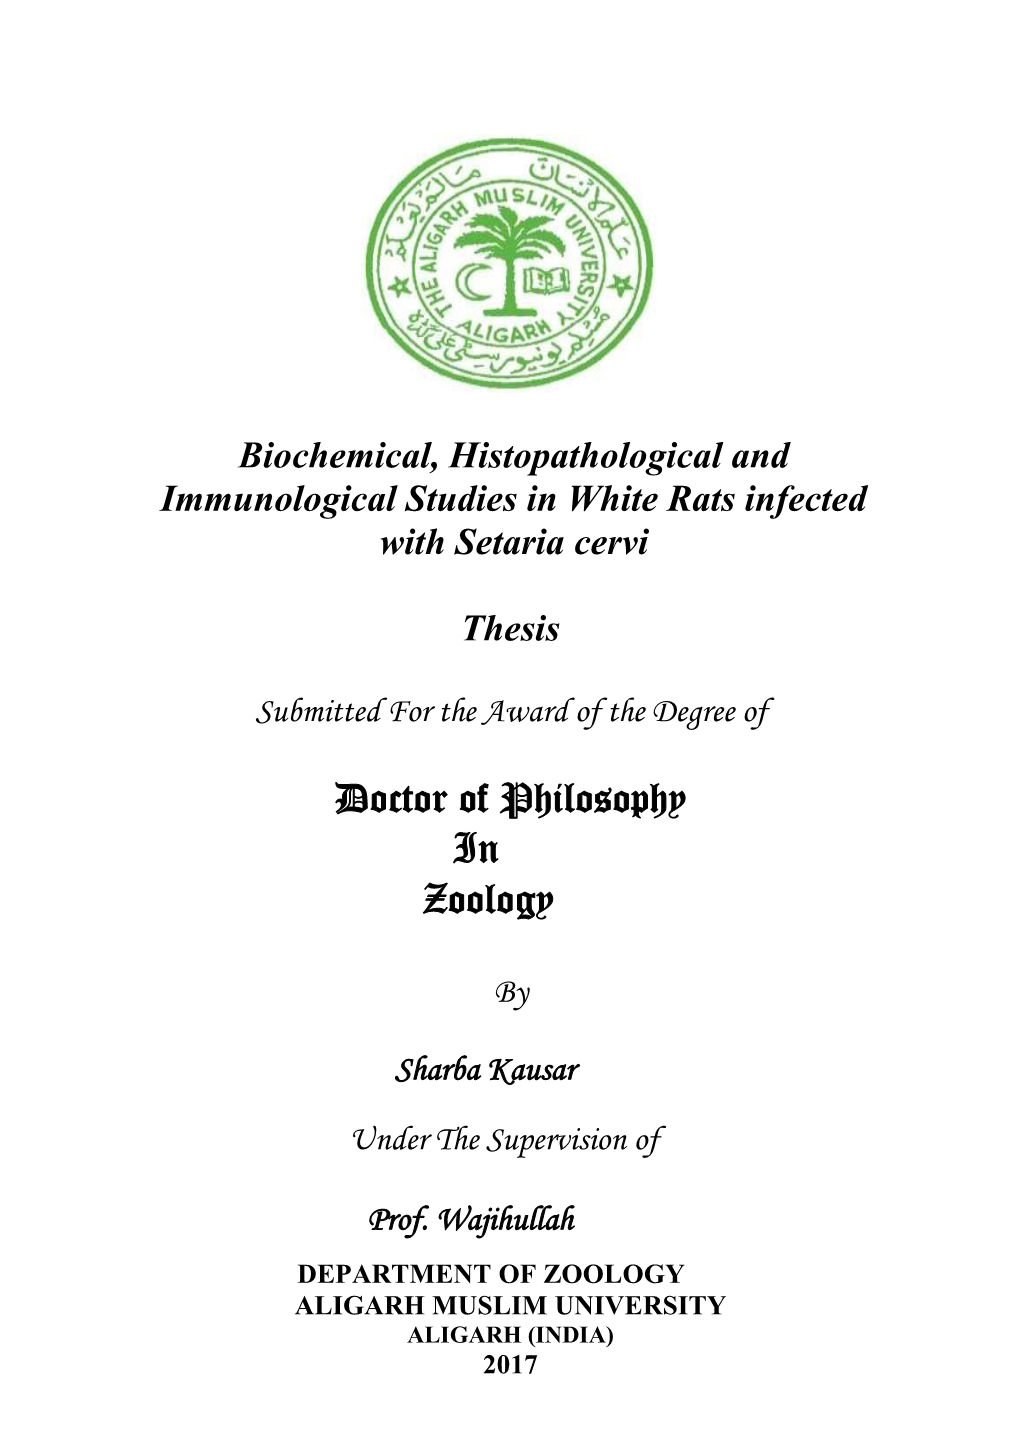 Doctor of Philosophy in Zoology